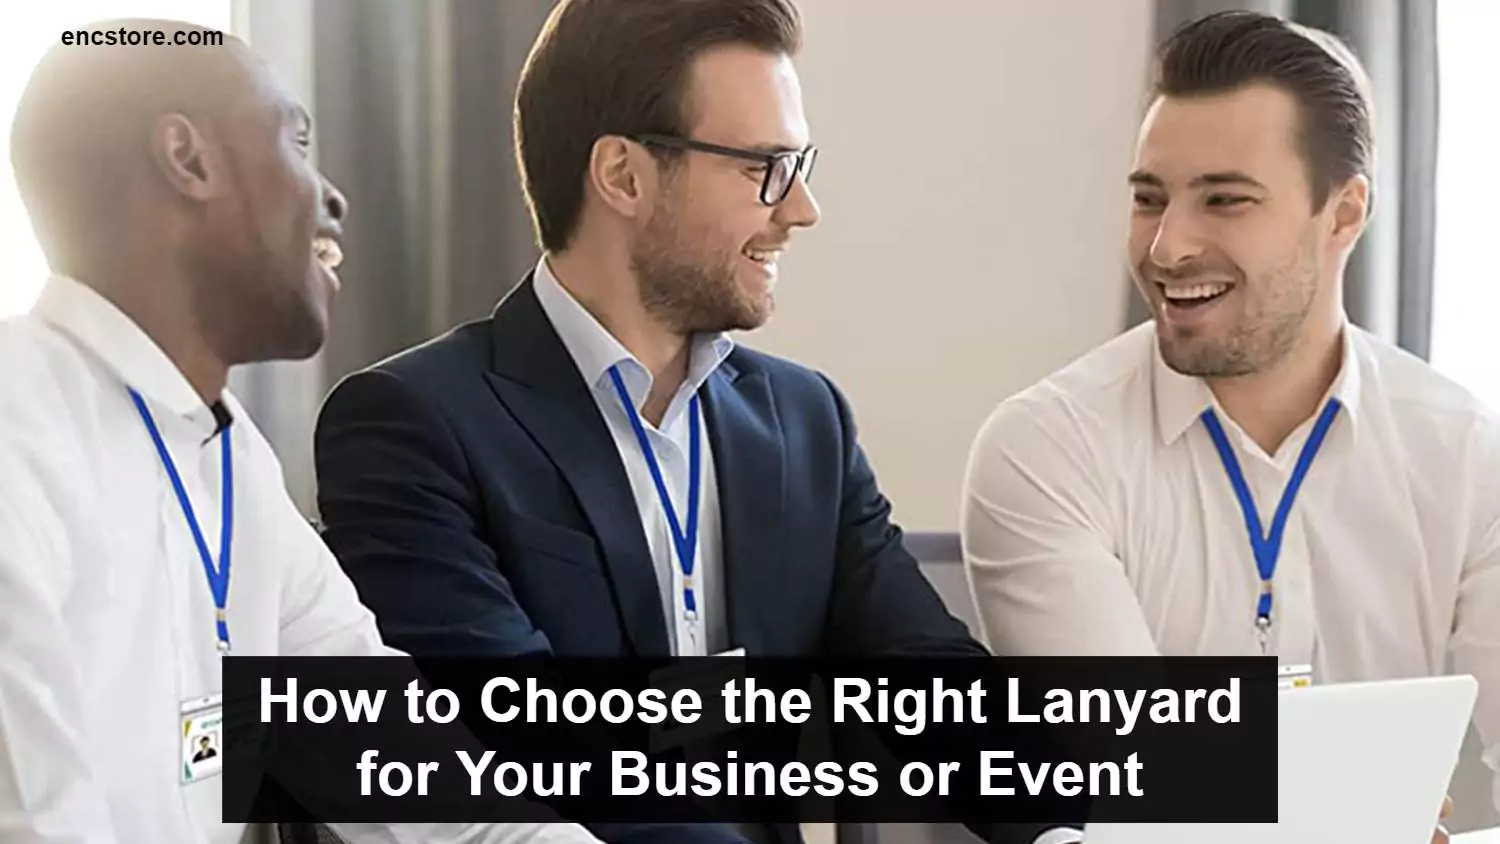 How to Choose the Right Lanyard for Your Business or Events